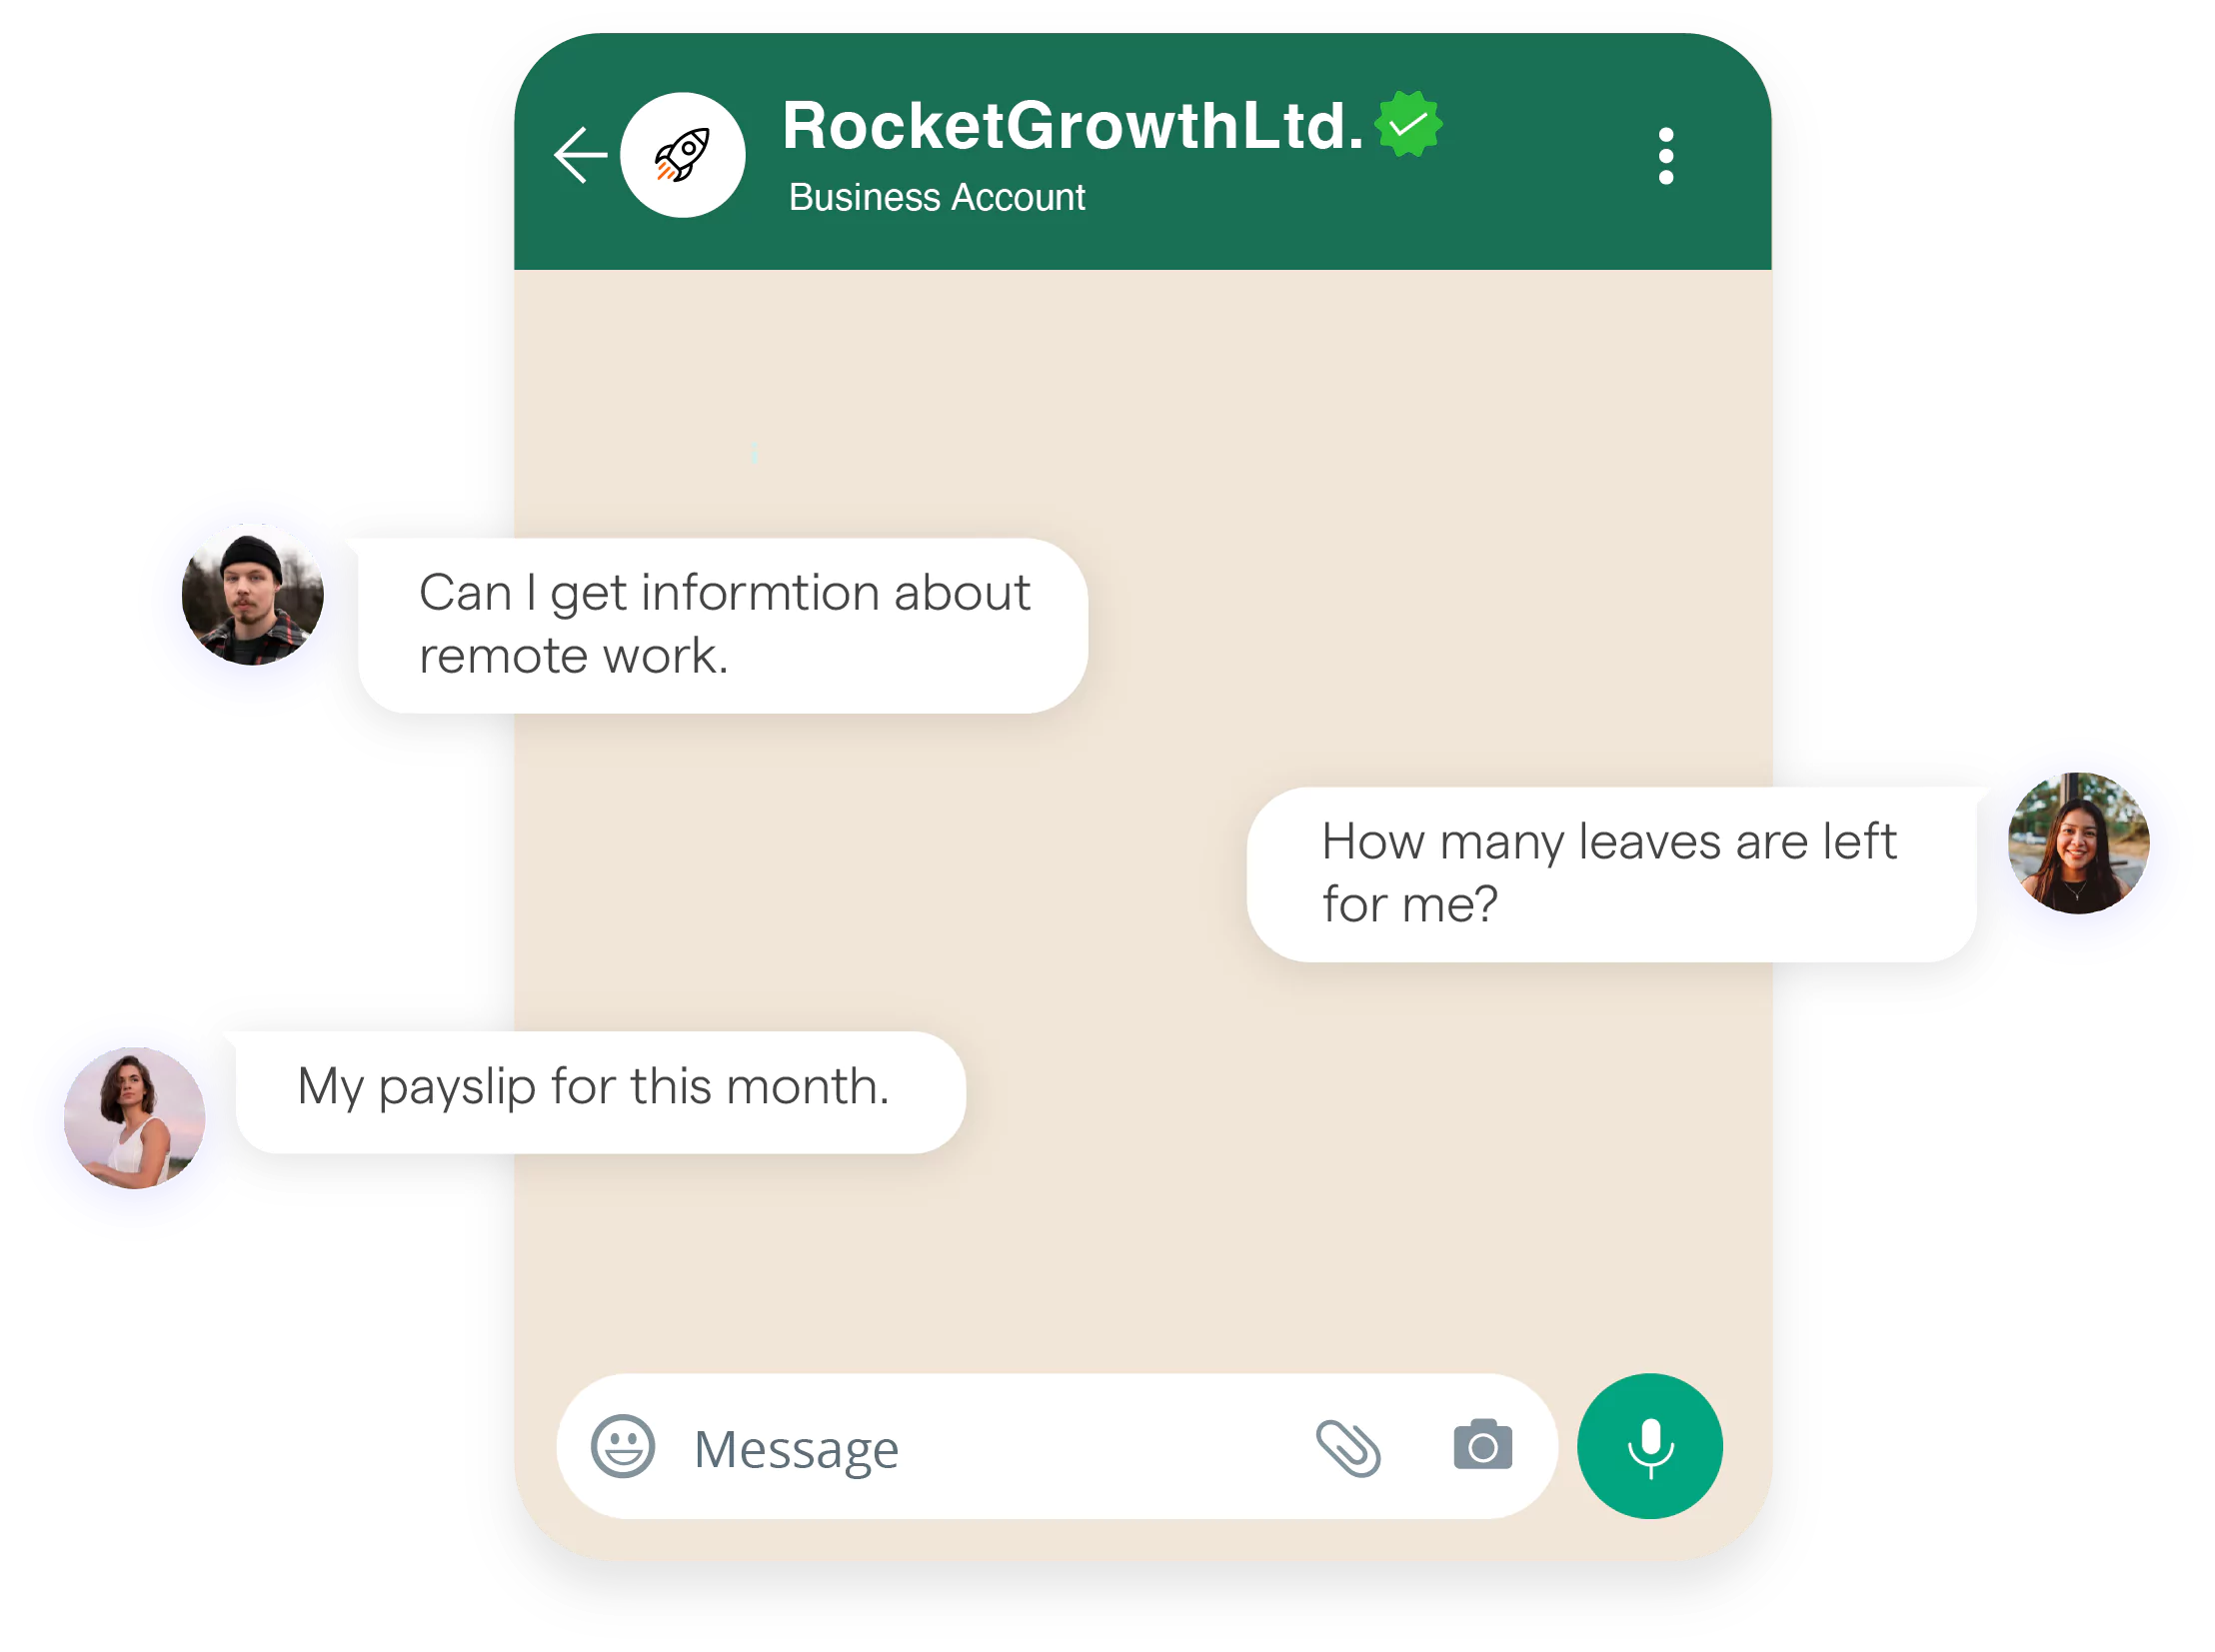 WhatsApp Chatbot for Customer Support